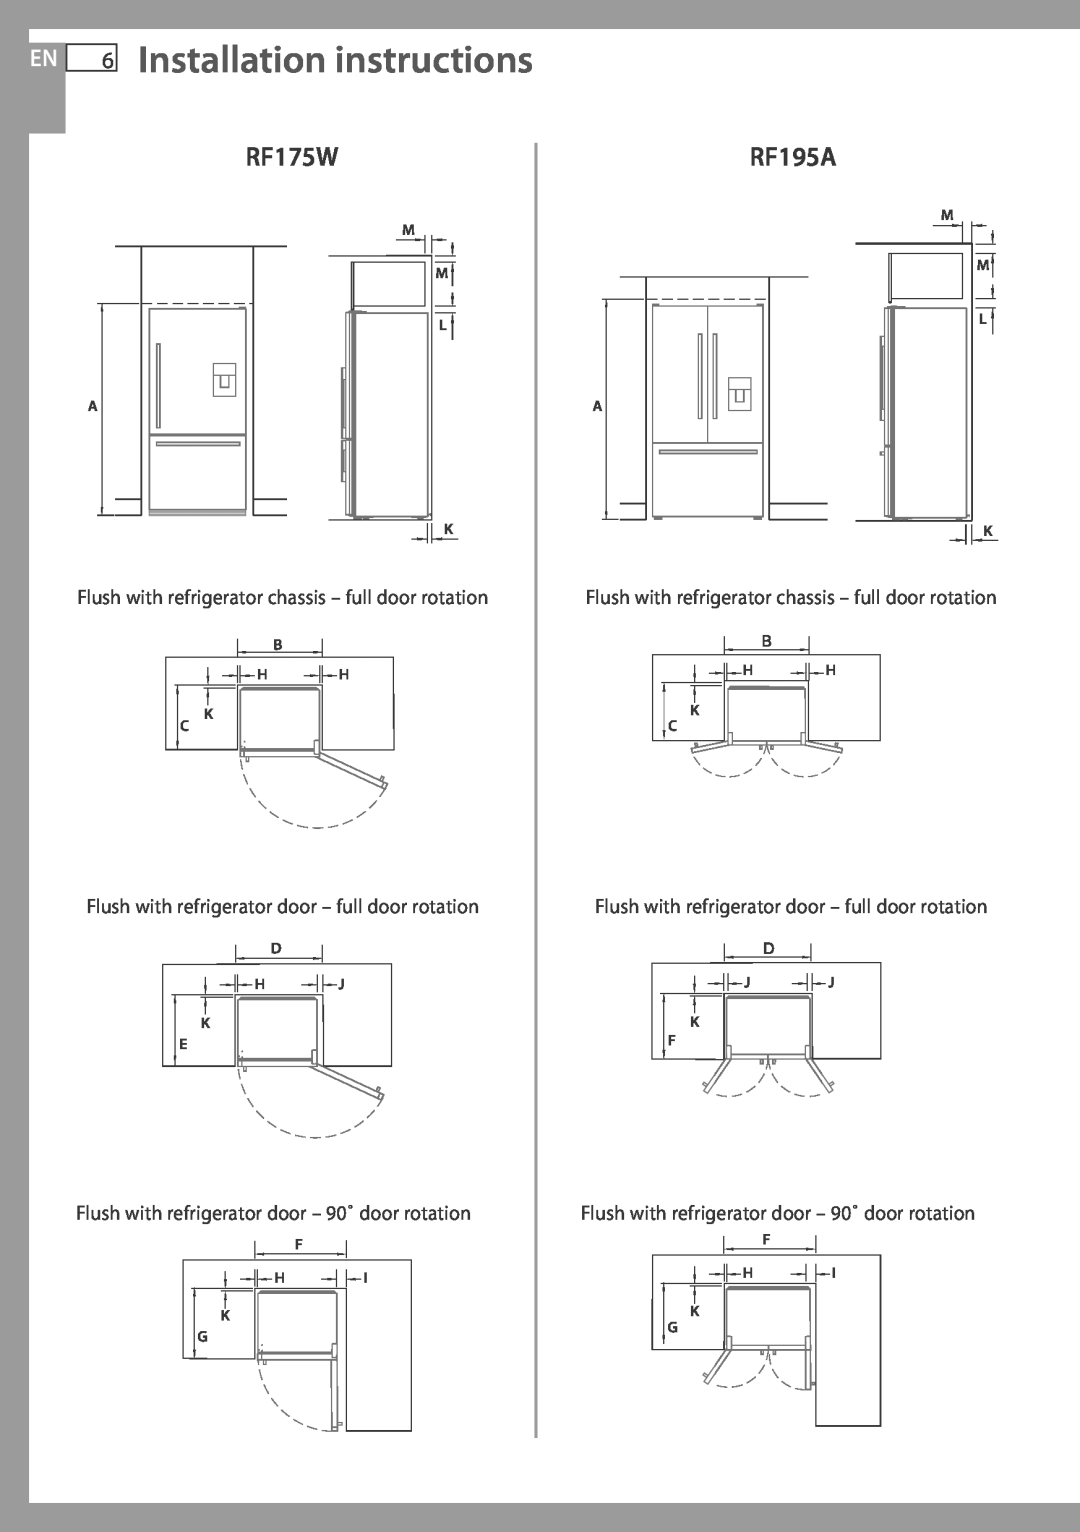 Fisher & Paykel RF175W installation instructions EN 6 Installation instructions, RF195A 